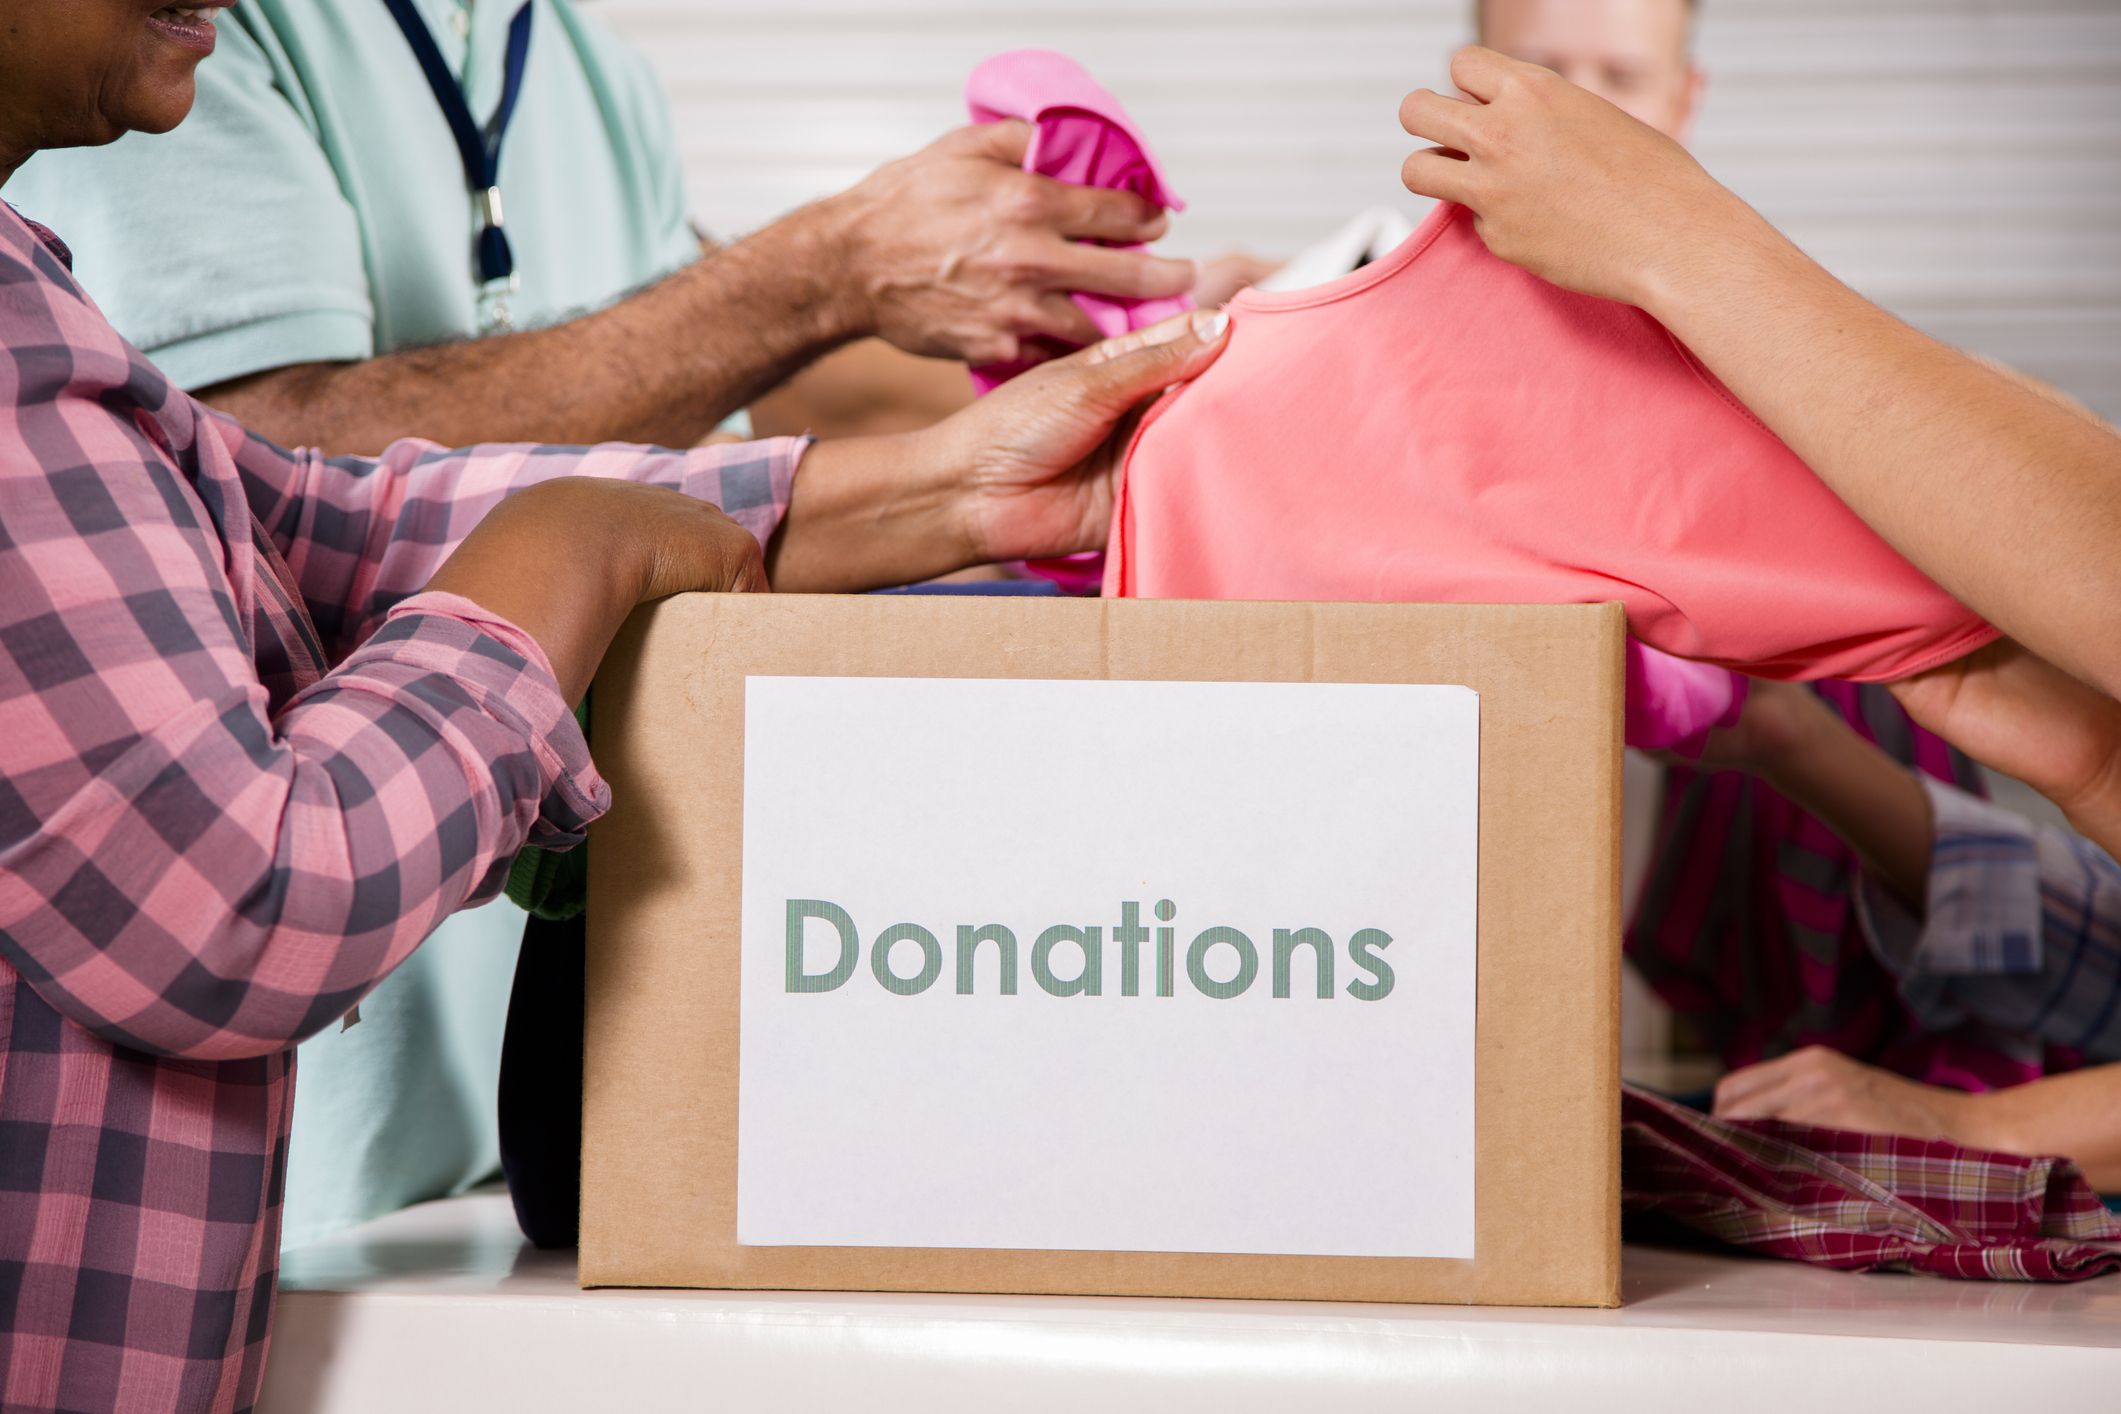 https://hips.hearstapps.com/hmg-prod/images/group-of-volunteers-provide-clothing-donations-to-royalty-free-image-1602271809.jpg